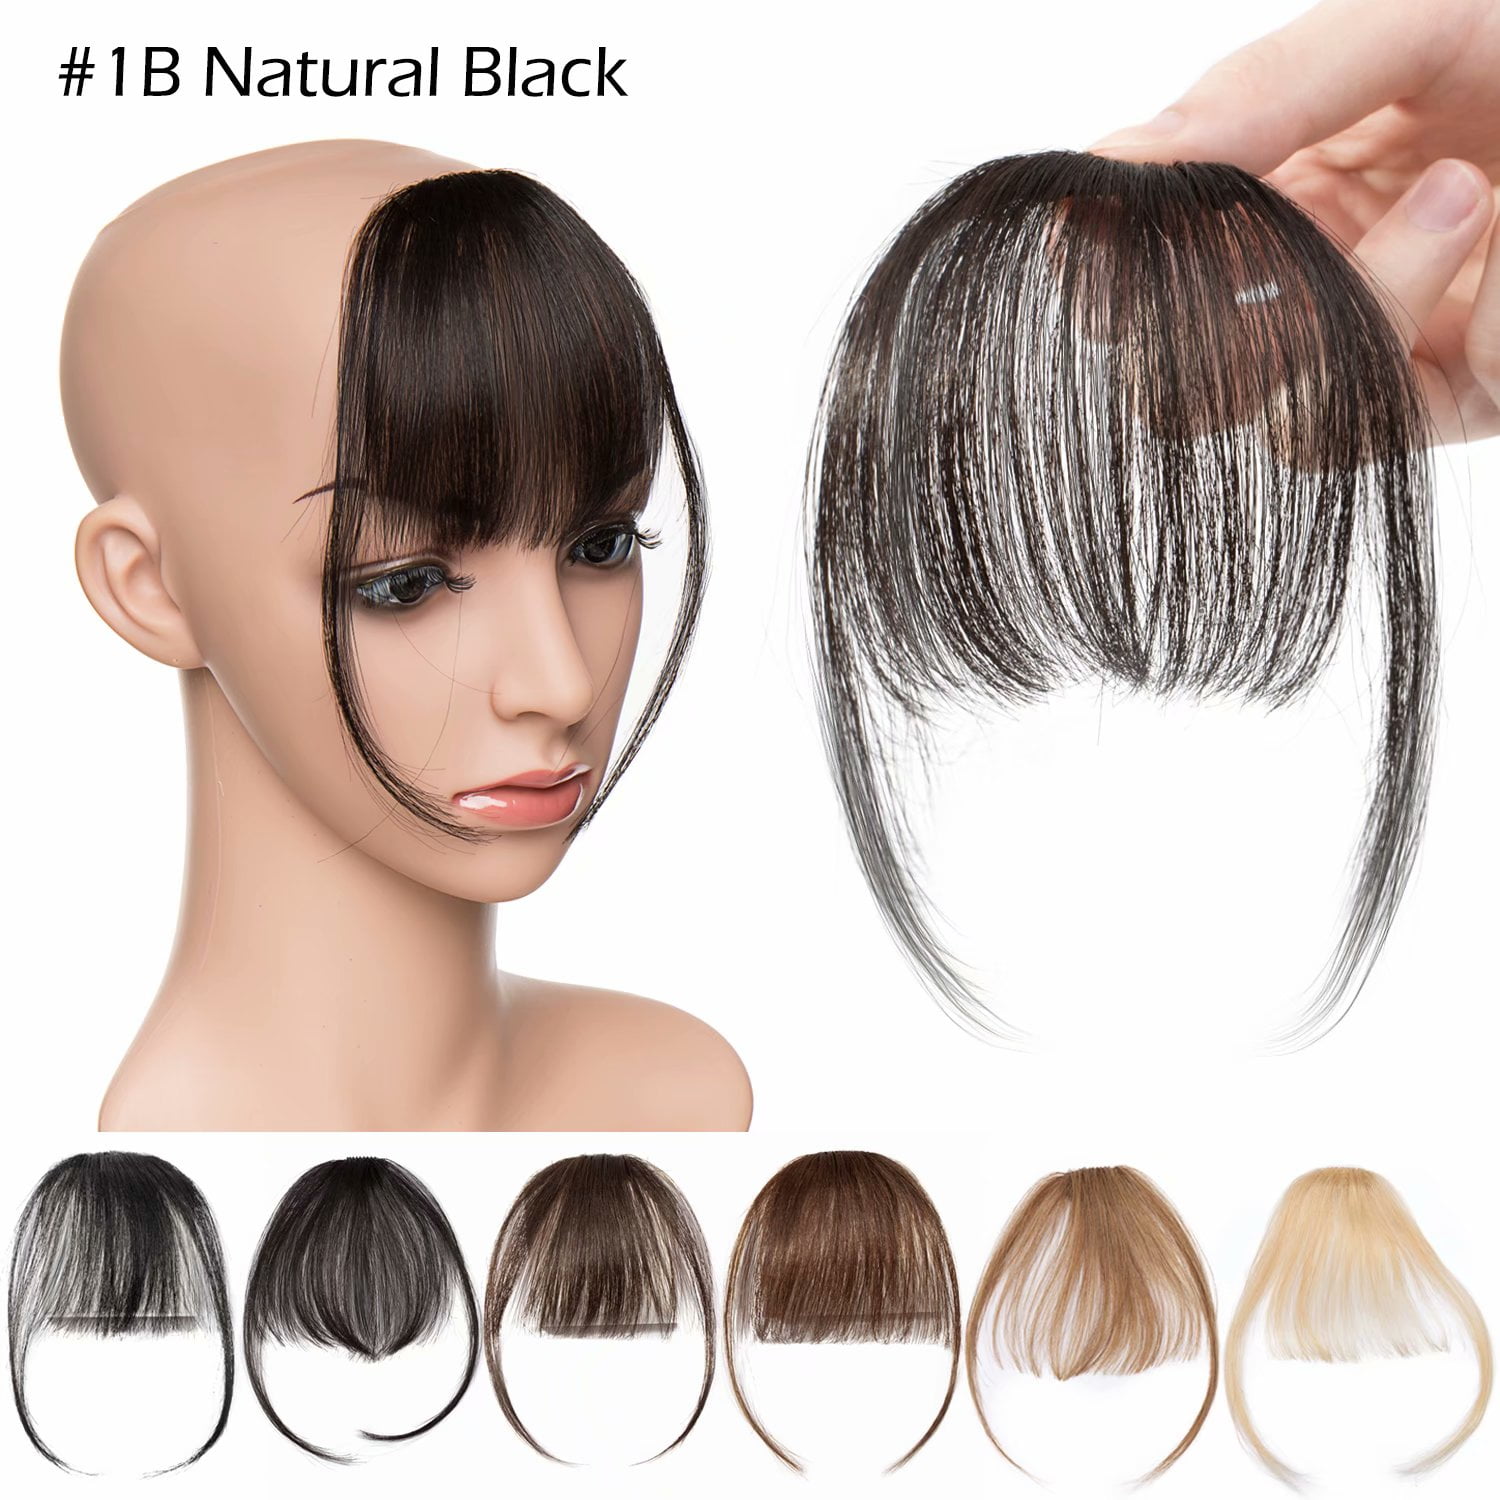 Ladies Party Natural Clip on Bang Front Fringe Hair Extension Wigs Piece 